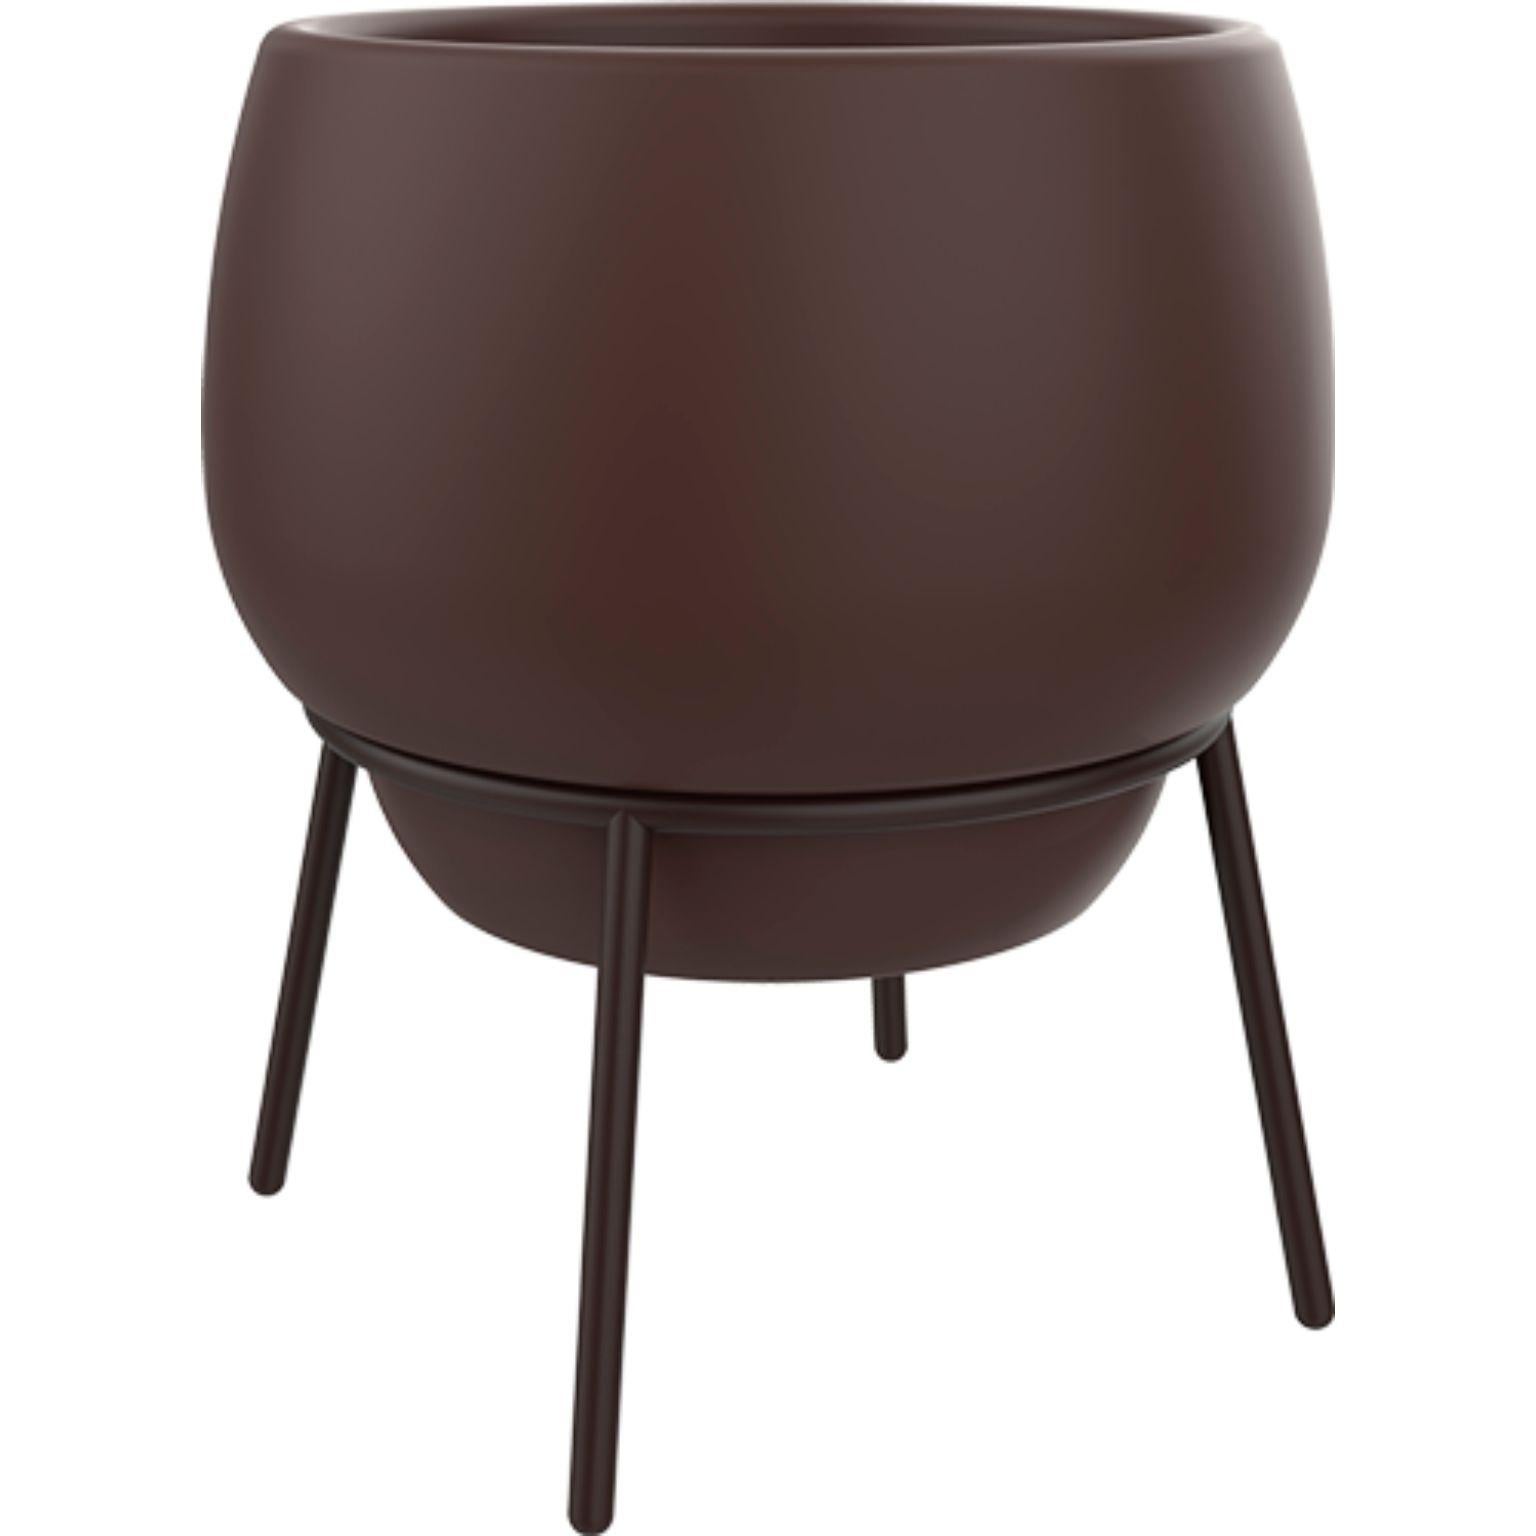 Lace Chocolate 65 pot by MOWEE
Dimensions: Ø71 x H76 cm
Material: Polyethylene and stainless steel.
Weight: 9 kg.
Also available in different colors and finishes (Lacquered or retroilluminated).

Lace is a collection of furniture made by